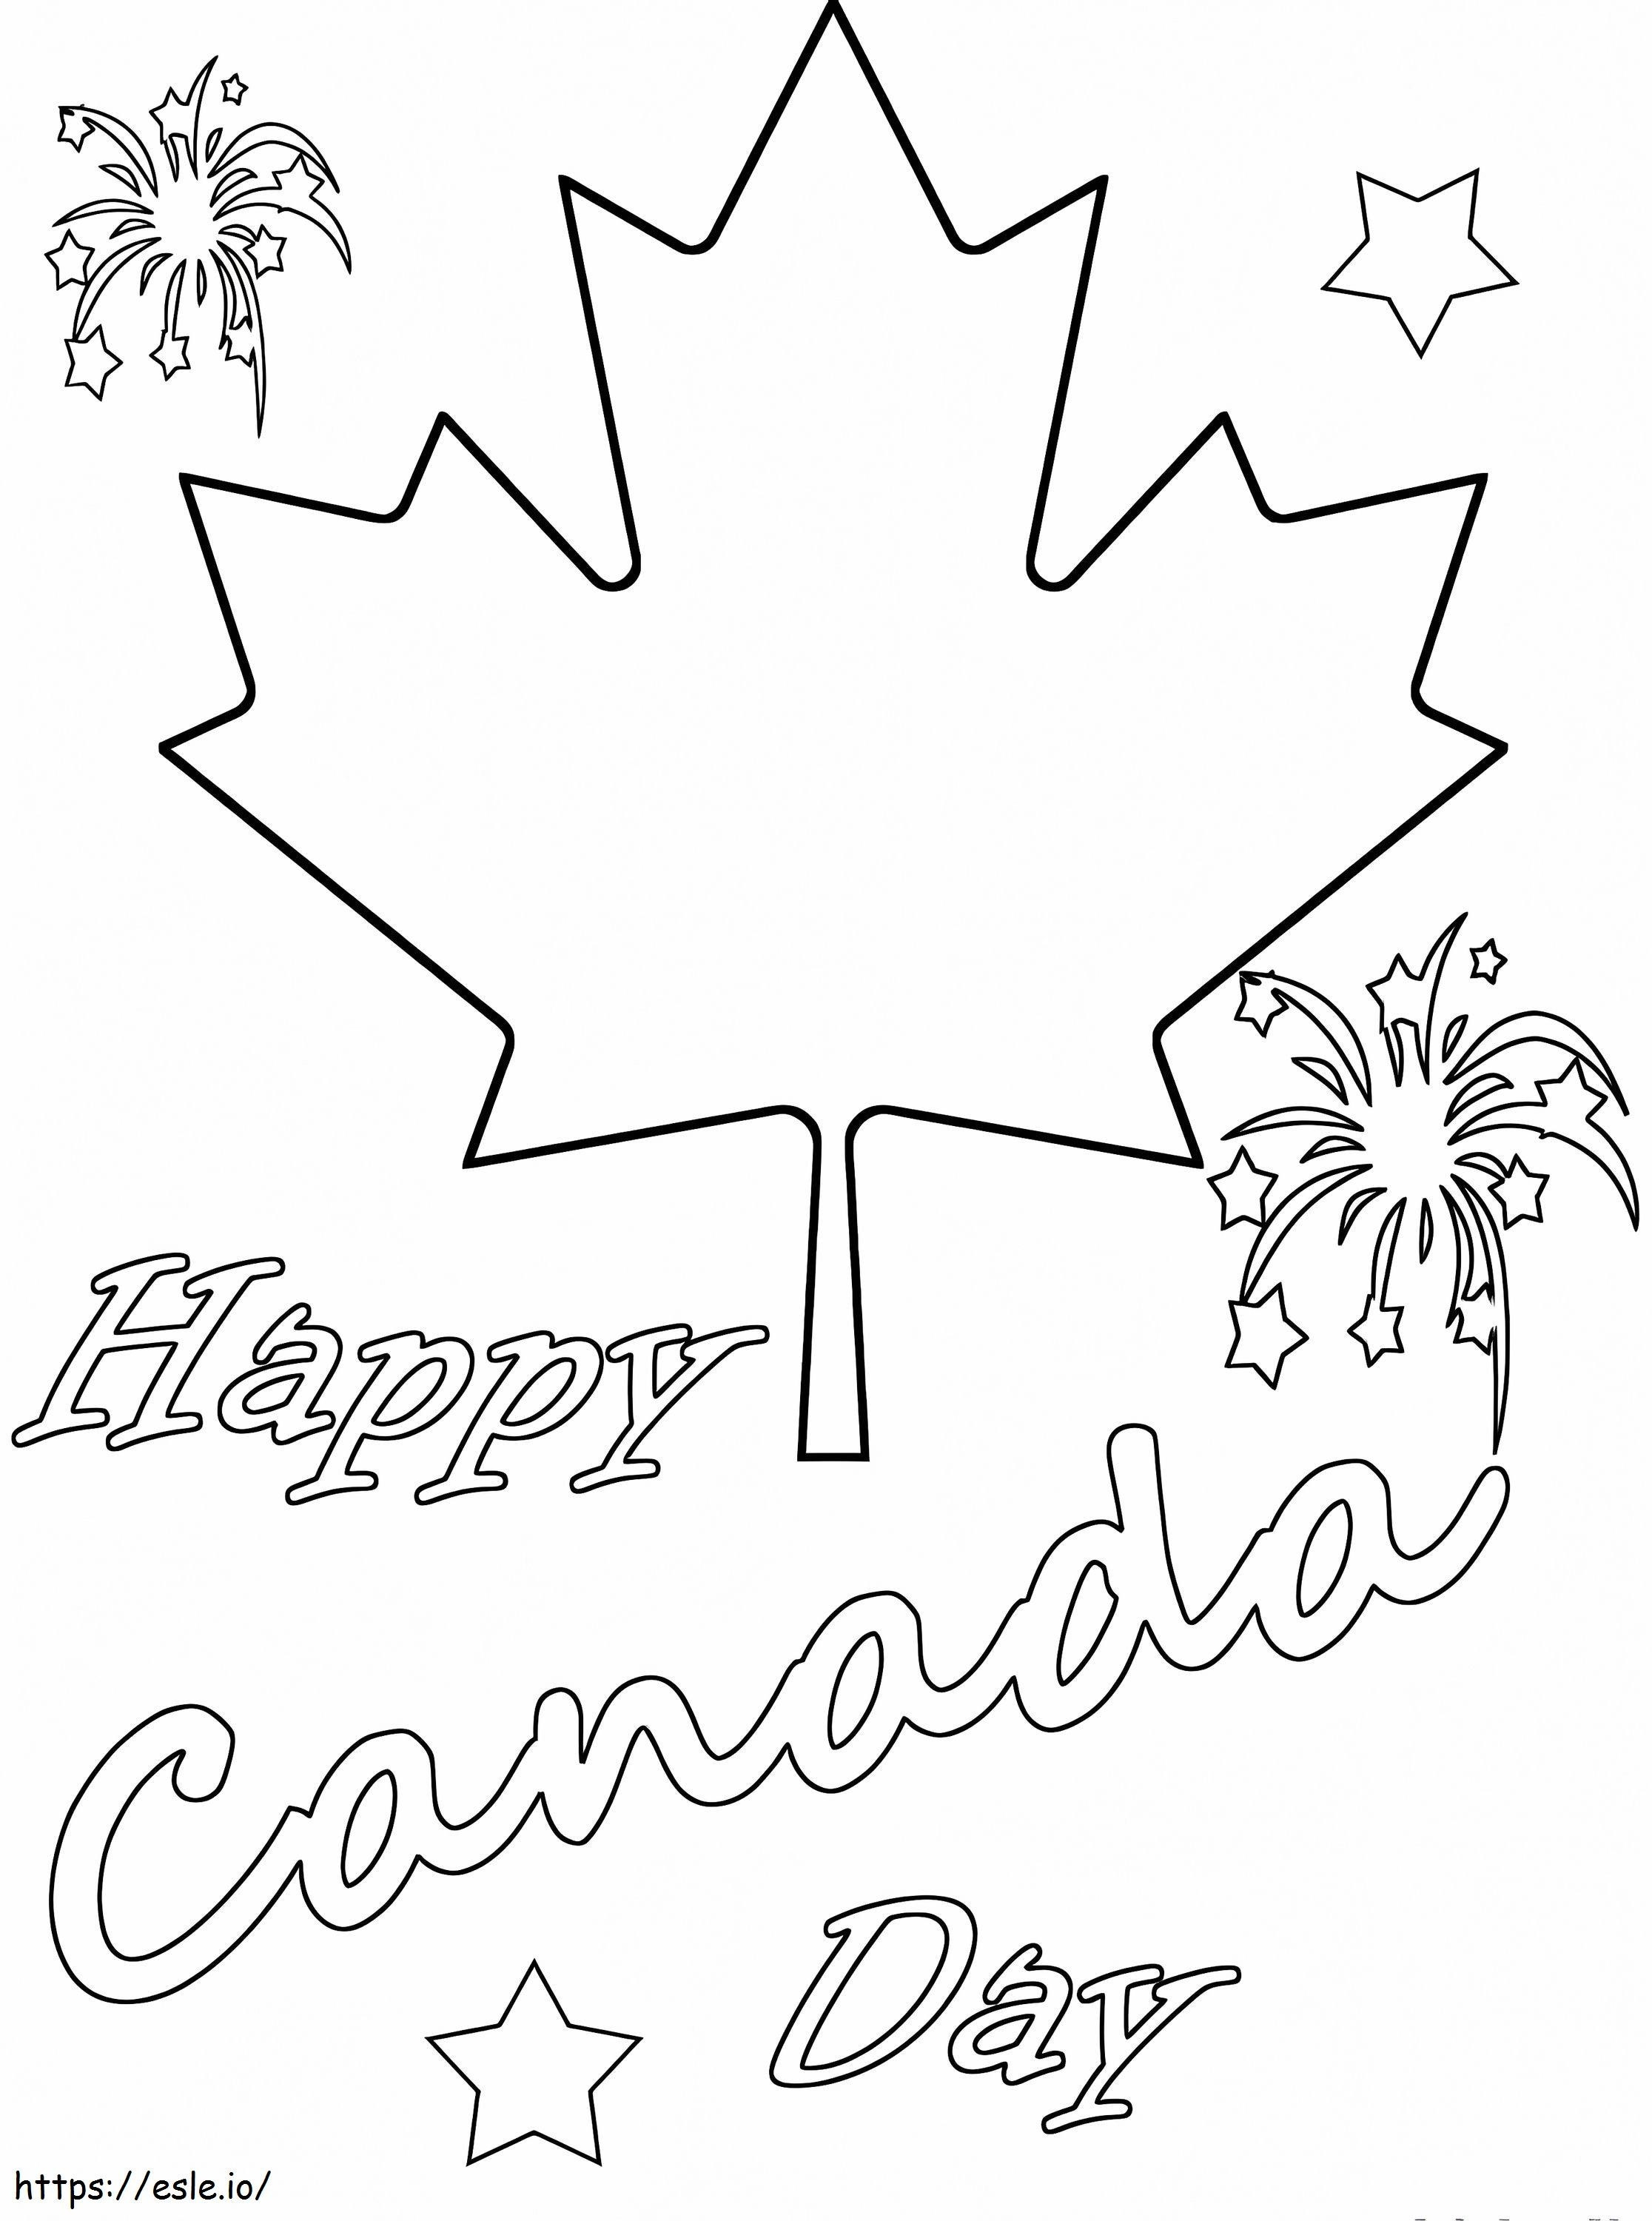 Happy Canada Day 7 coloring page